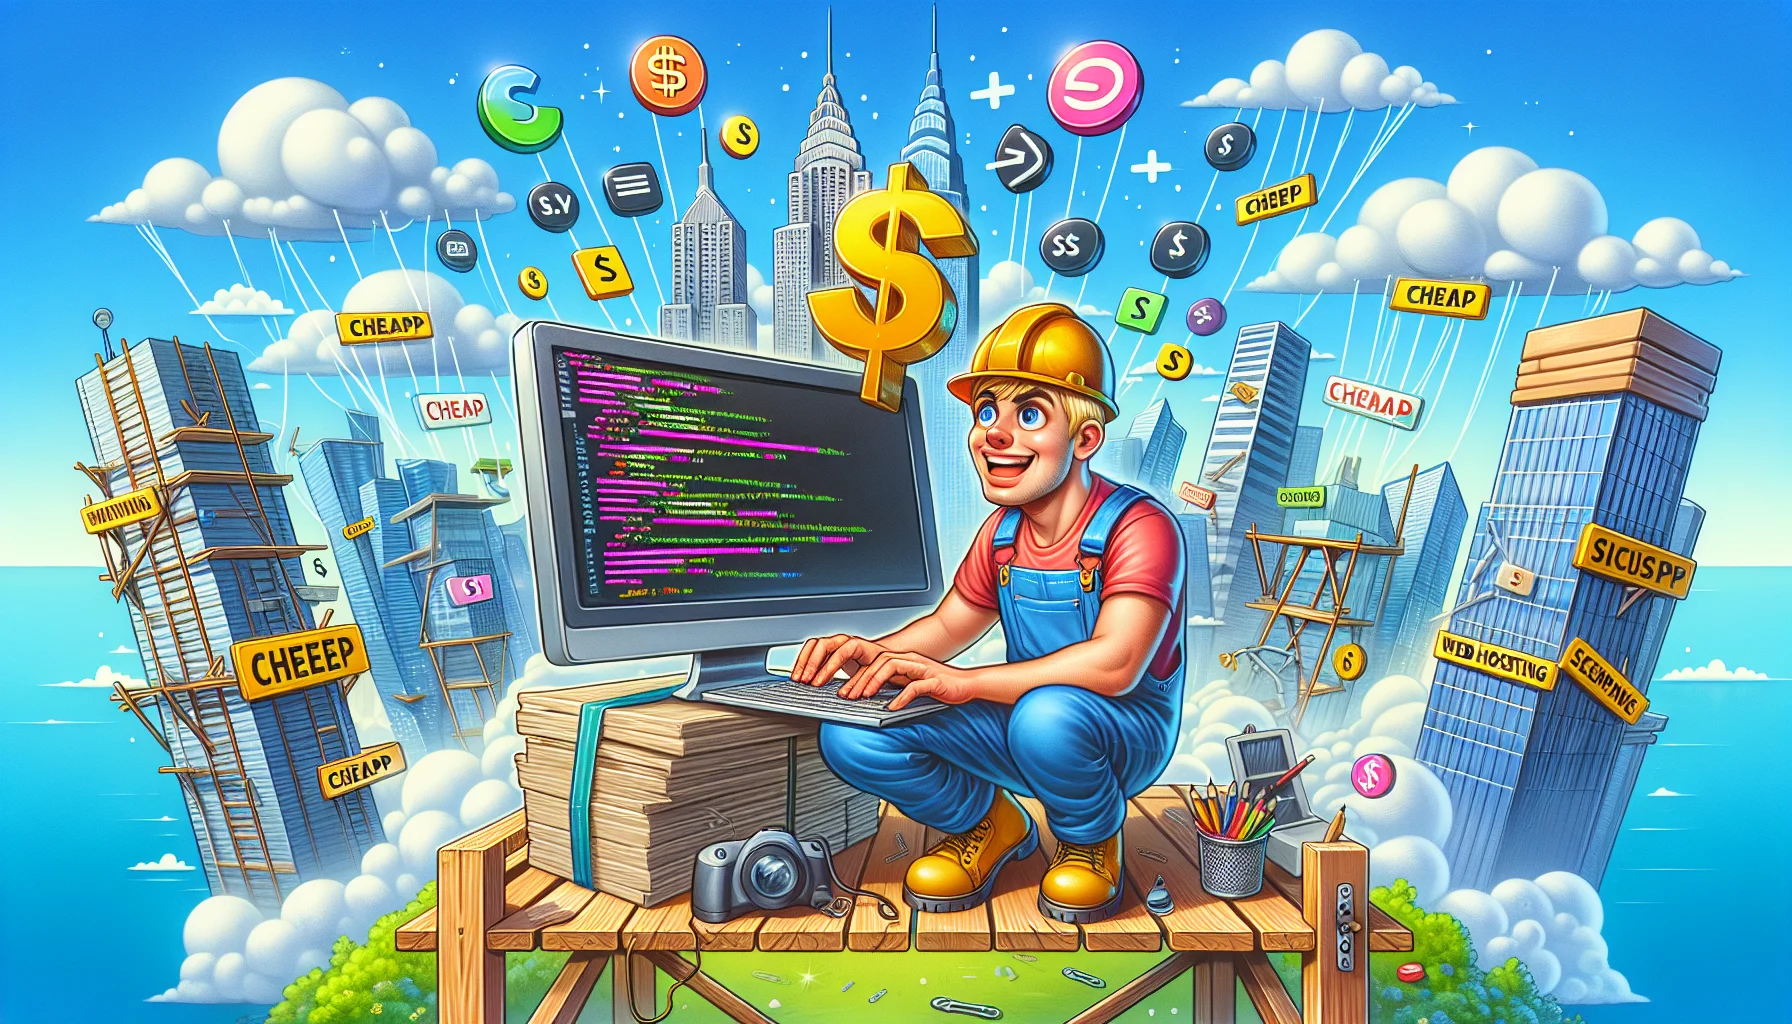 Create a humorous and vivid image showcasing a metaphorical website builder. Imagine this as a cheery construction worker in overalls, wearing a large dollar sign necklace to symbolize 'cheap'. He's furiously coding on a desktop computer placed on a wooden scaffold amidst floating HTML tags and website icons. A beautiful skyline labelled as 'Web Hosting' is in the background, with chart-topping skyscrapers denoting successful websites. The entire scenario is designed to make the concept of web hosting and building a website inexpensive and enticing.